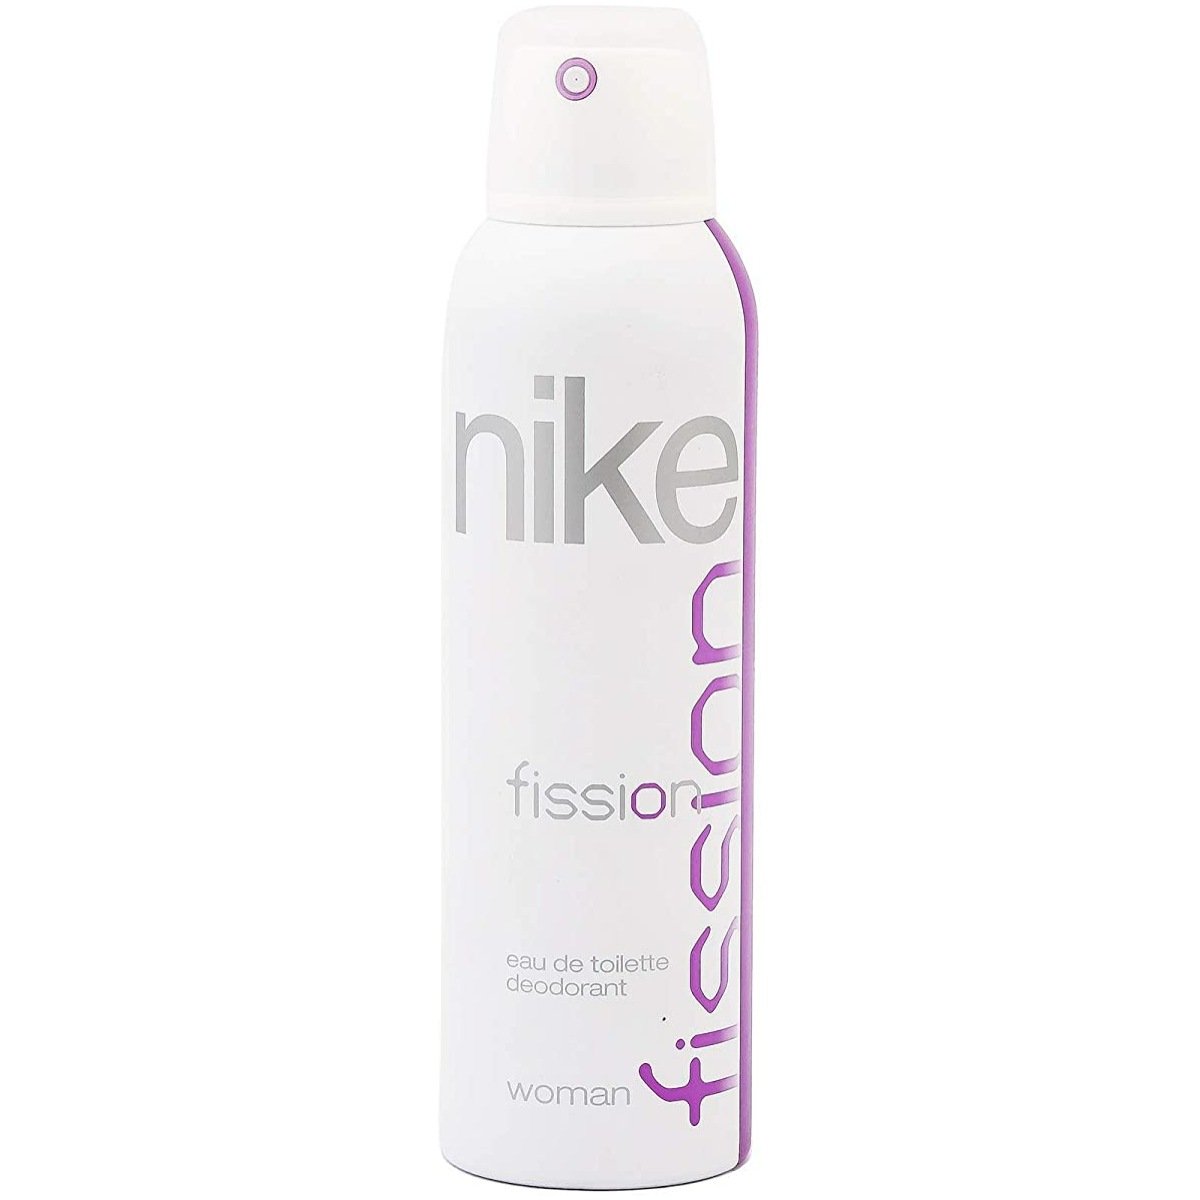 Nike Fission Deodorant For  Woman 200ml Nike Fission For Women Opens With Fresh Notes Of Cucumber, Grapefruit And Magnolia The Heart Of This Sensual Fragrance Is Composed Of Tuberose, Rose, Violet, White Muguet And Apple Finishing Off With White Amber And Woods, This Delicious Fragrance Is Recommended For Daytime Wear